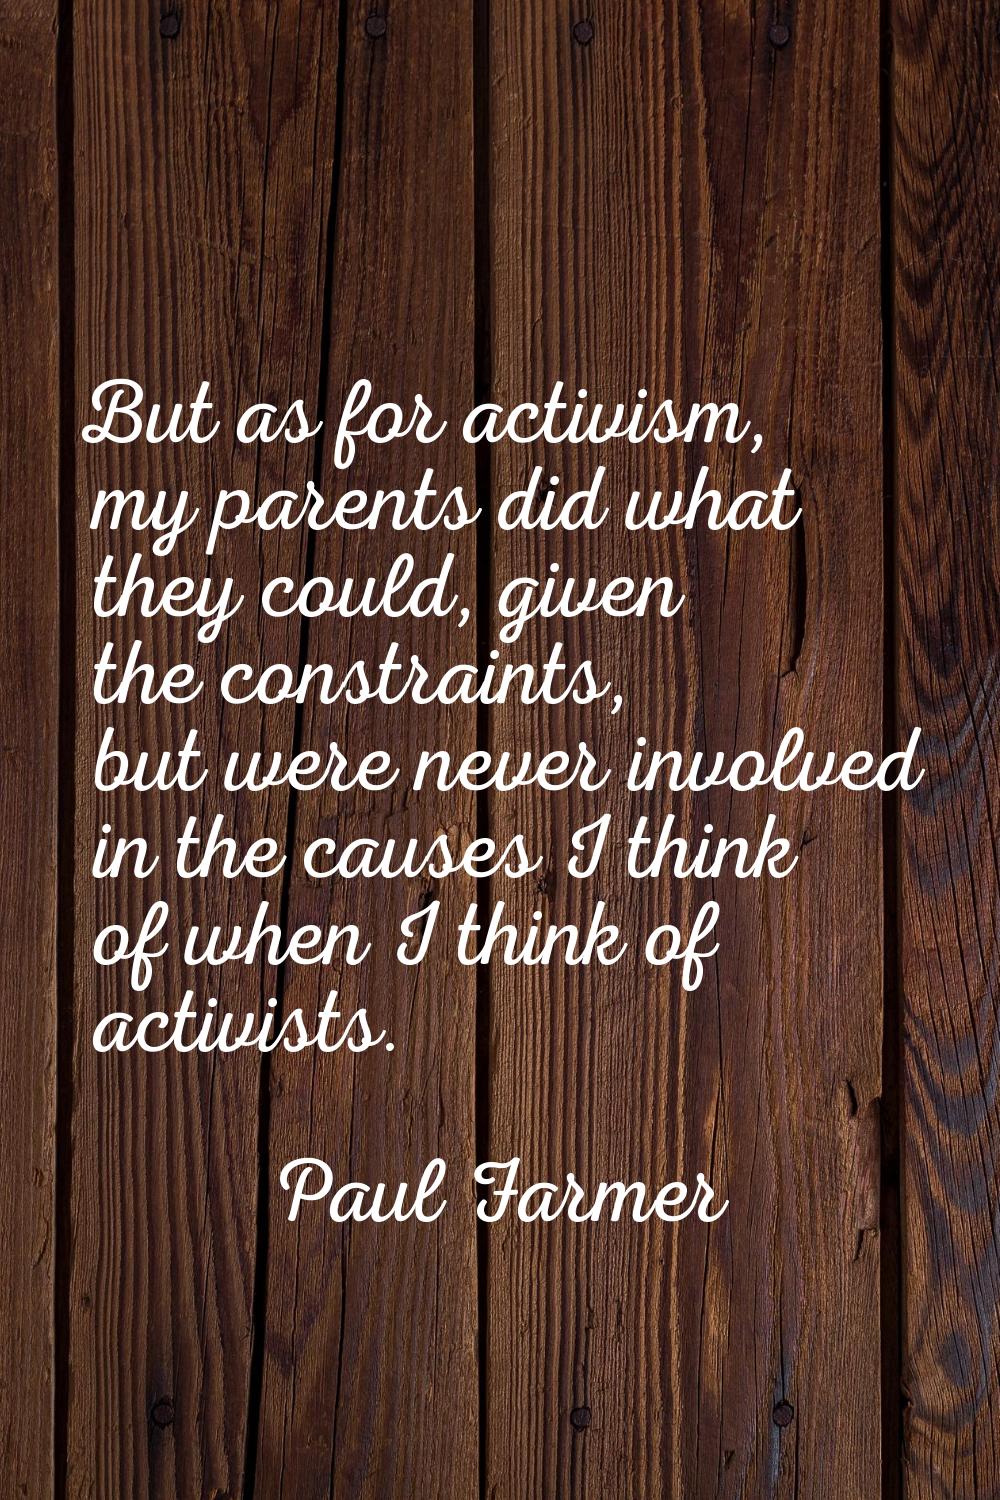 But as for activism, my parents did what they could, given the constraints, but were never involved